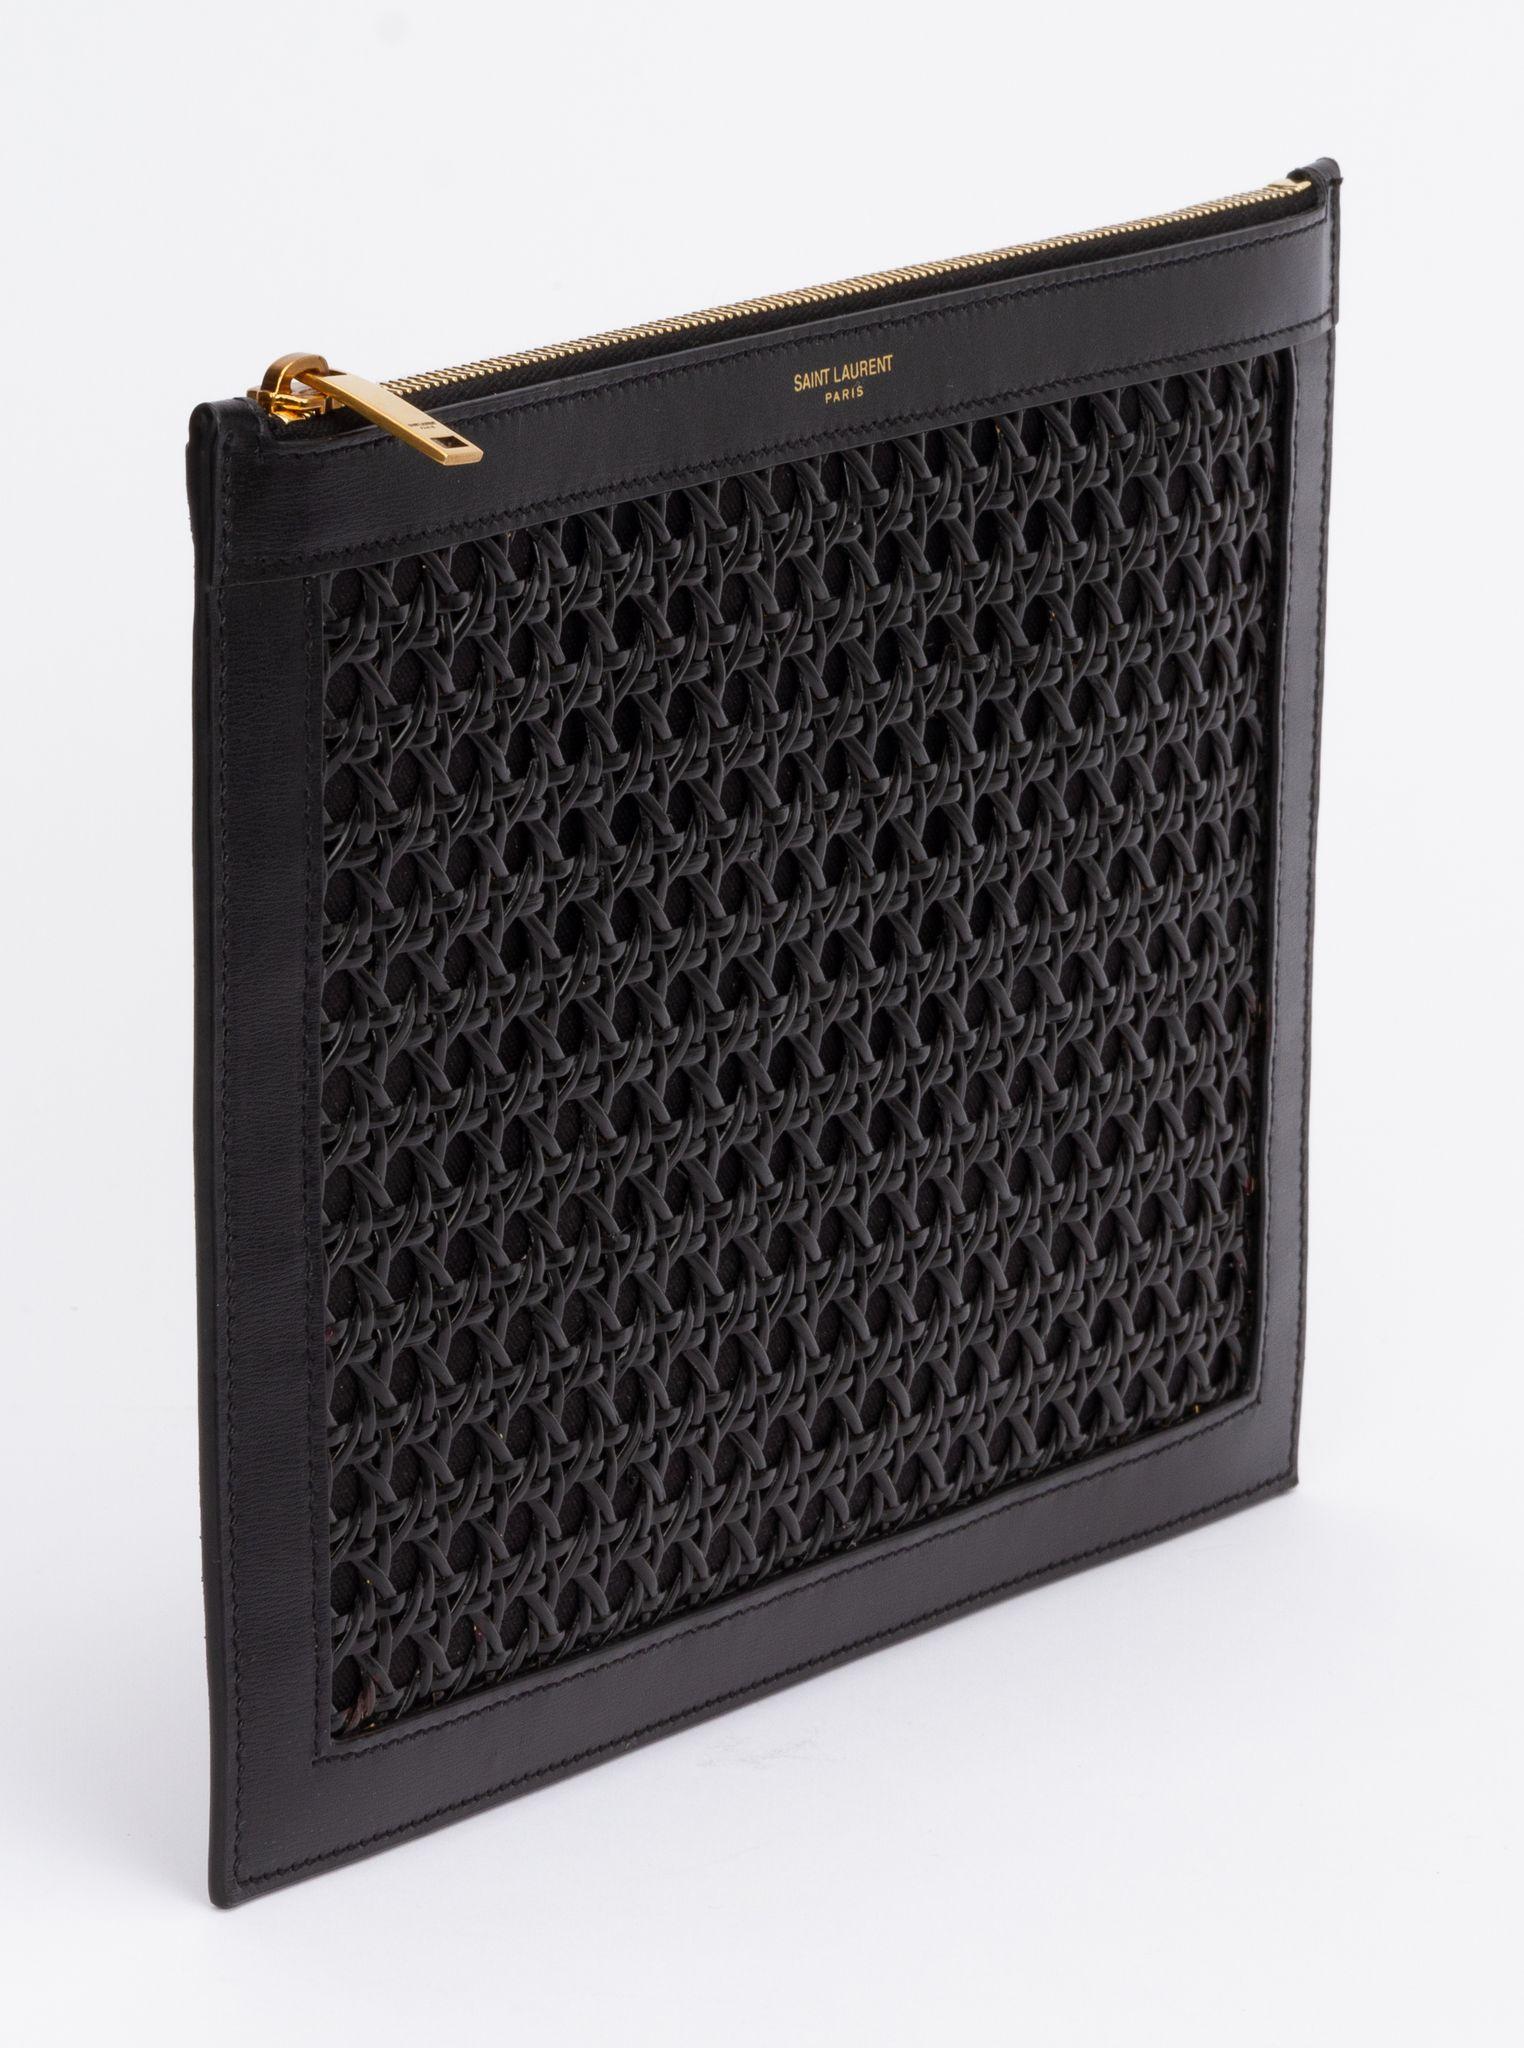 Yves Saint Laurent clutch in black crafted of wicker. The bag is trimmed with a polished leather and has an imprint of the Saint Laurent Logo in gold. The piece is in excellent condition and comes with the original dust cover. Brand new in unused